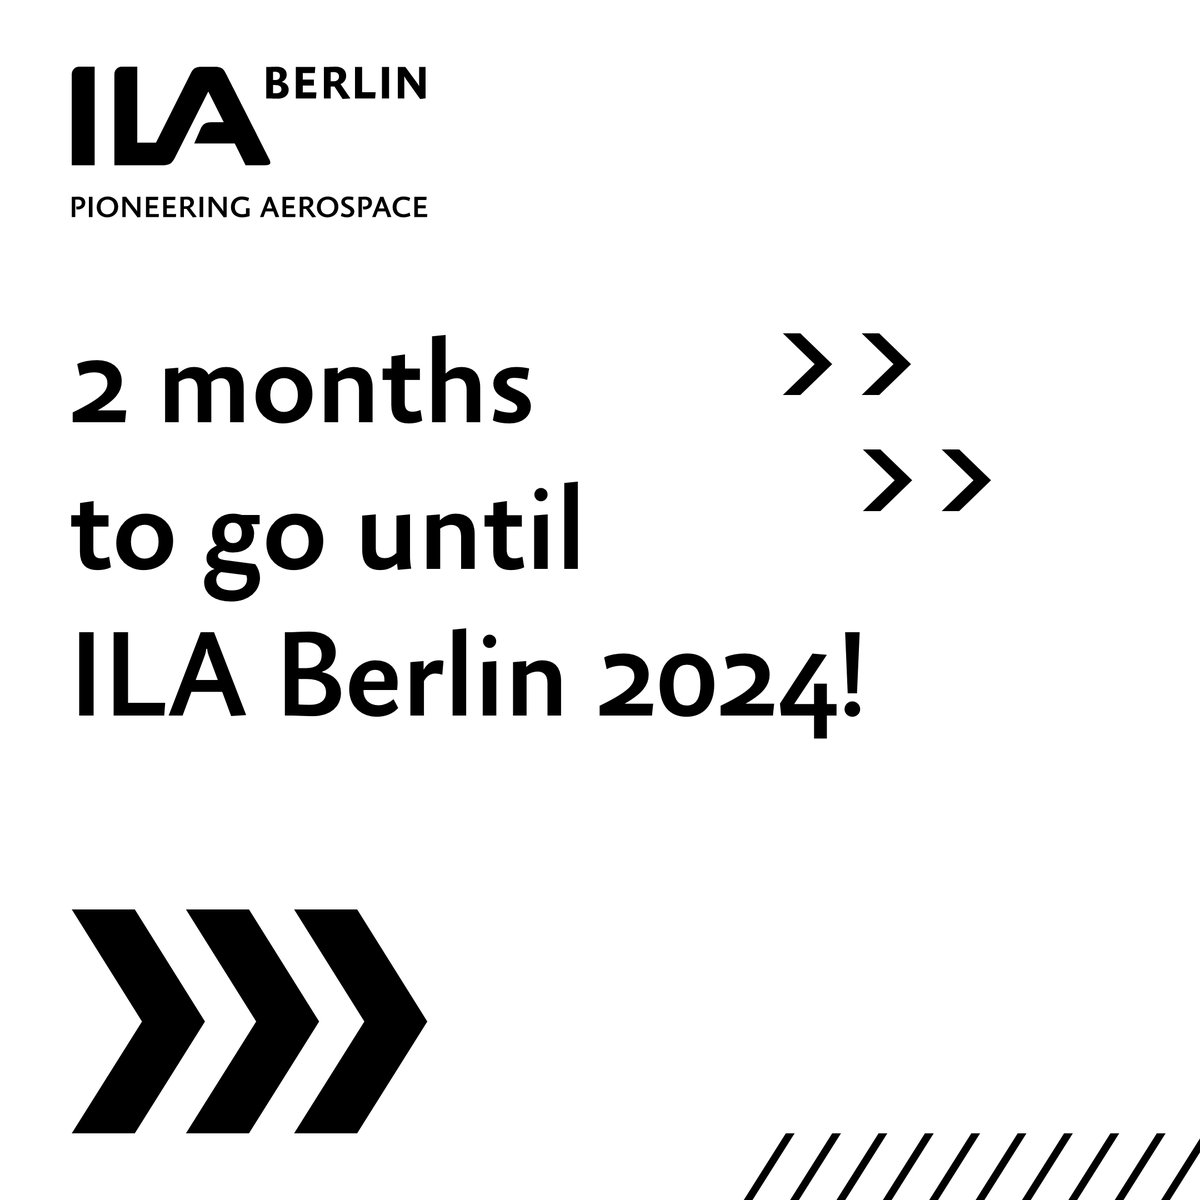 Only two months left until it's ILA'clock. Looking forward to all upcoming innovations at one of Europe's biggest fairs of aerospace! Get your tickets now: ila-berlin.de/en/tickets @bdlipresse @MesseBerlin #PioneeringAerospace